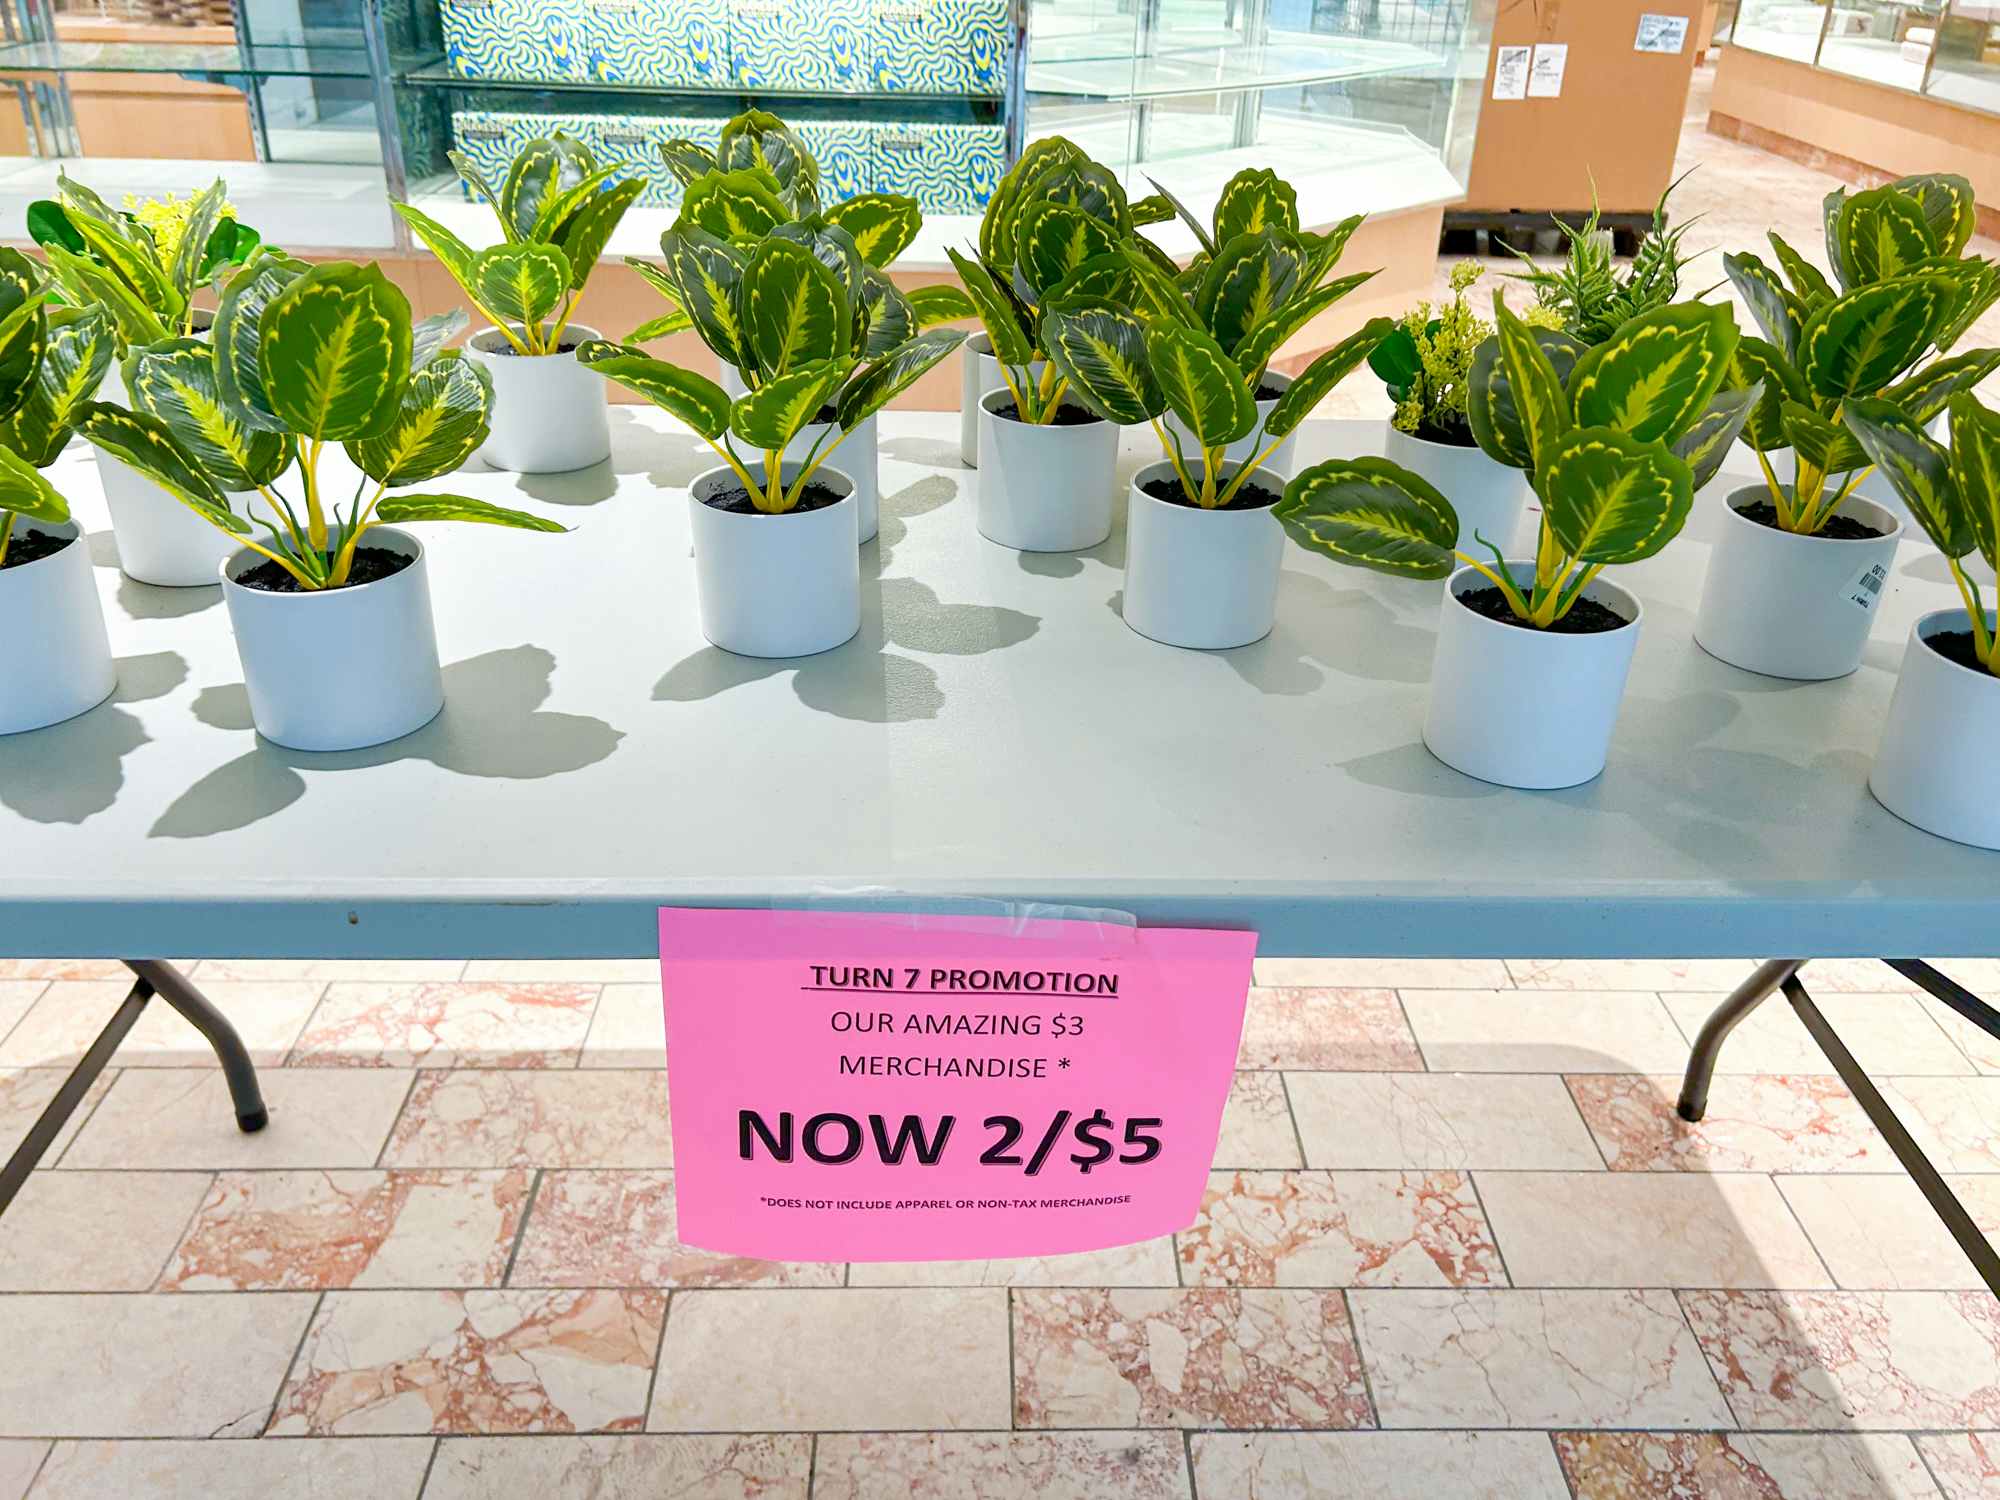 Some plants on a table with a sign that promotes them to be 2 for $5 at Turn7